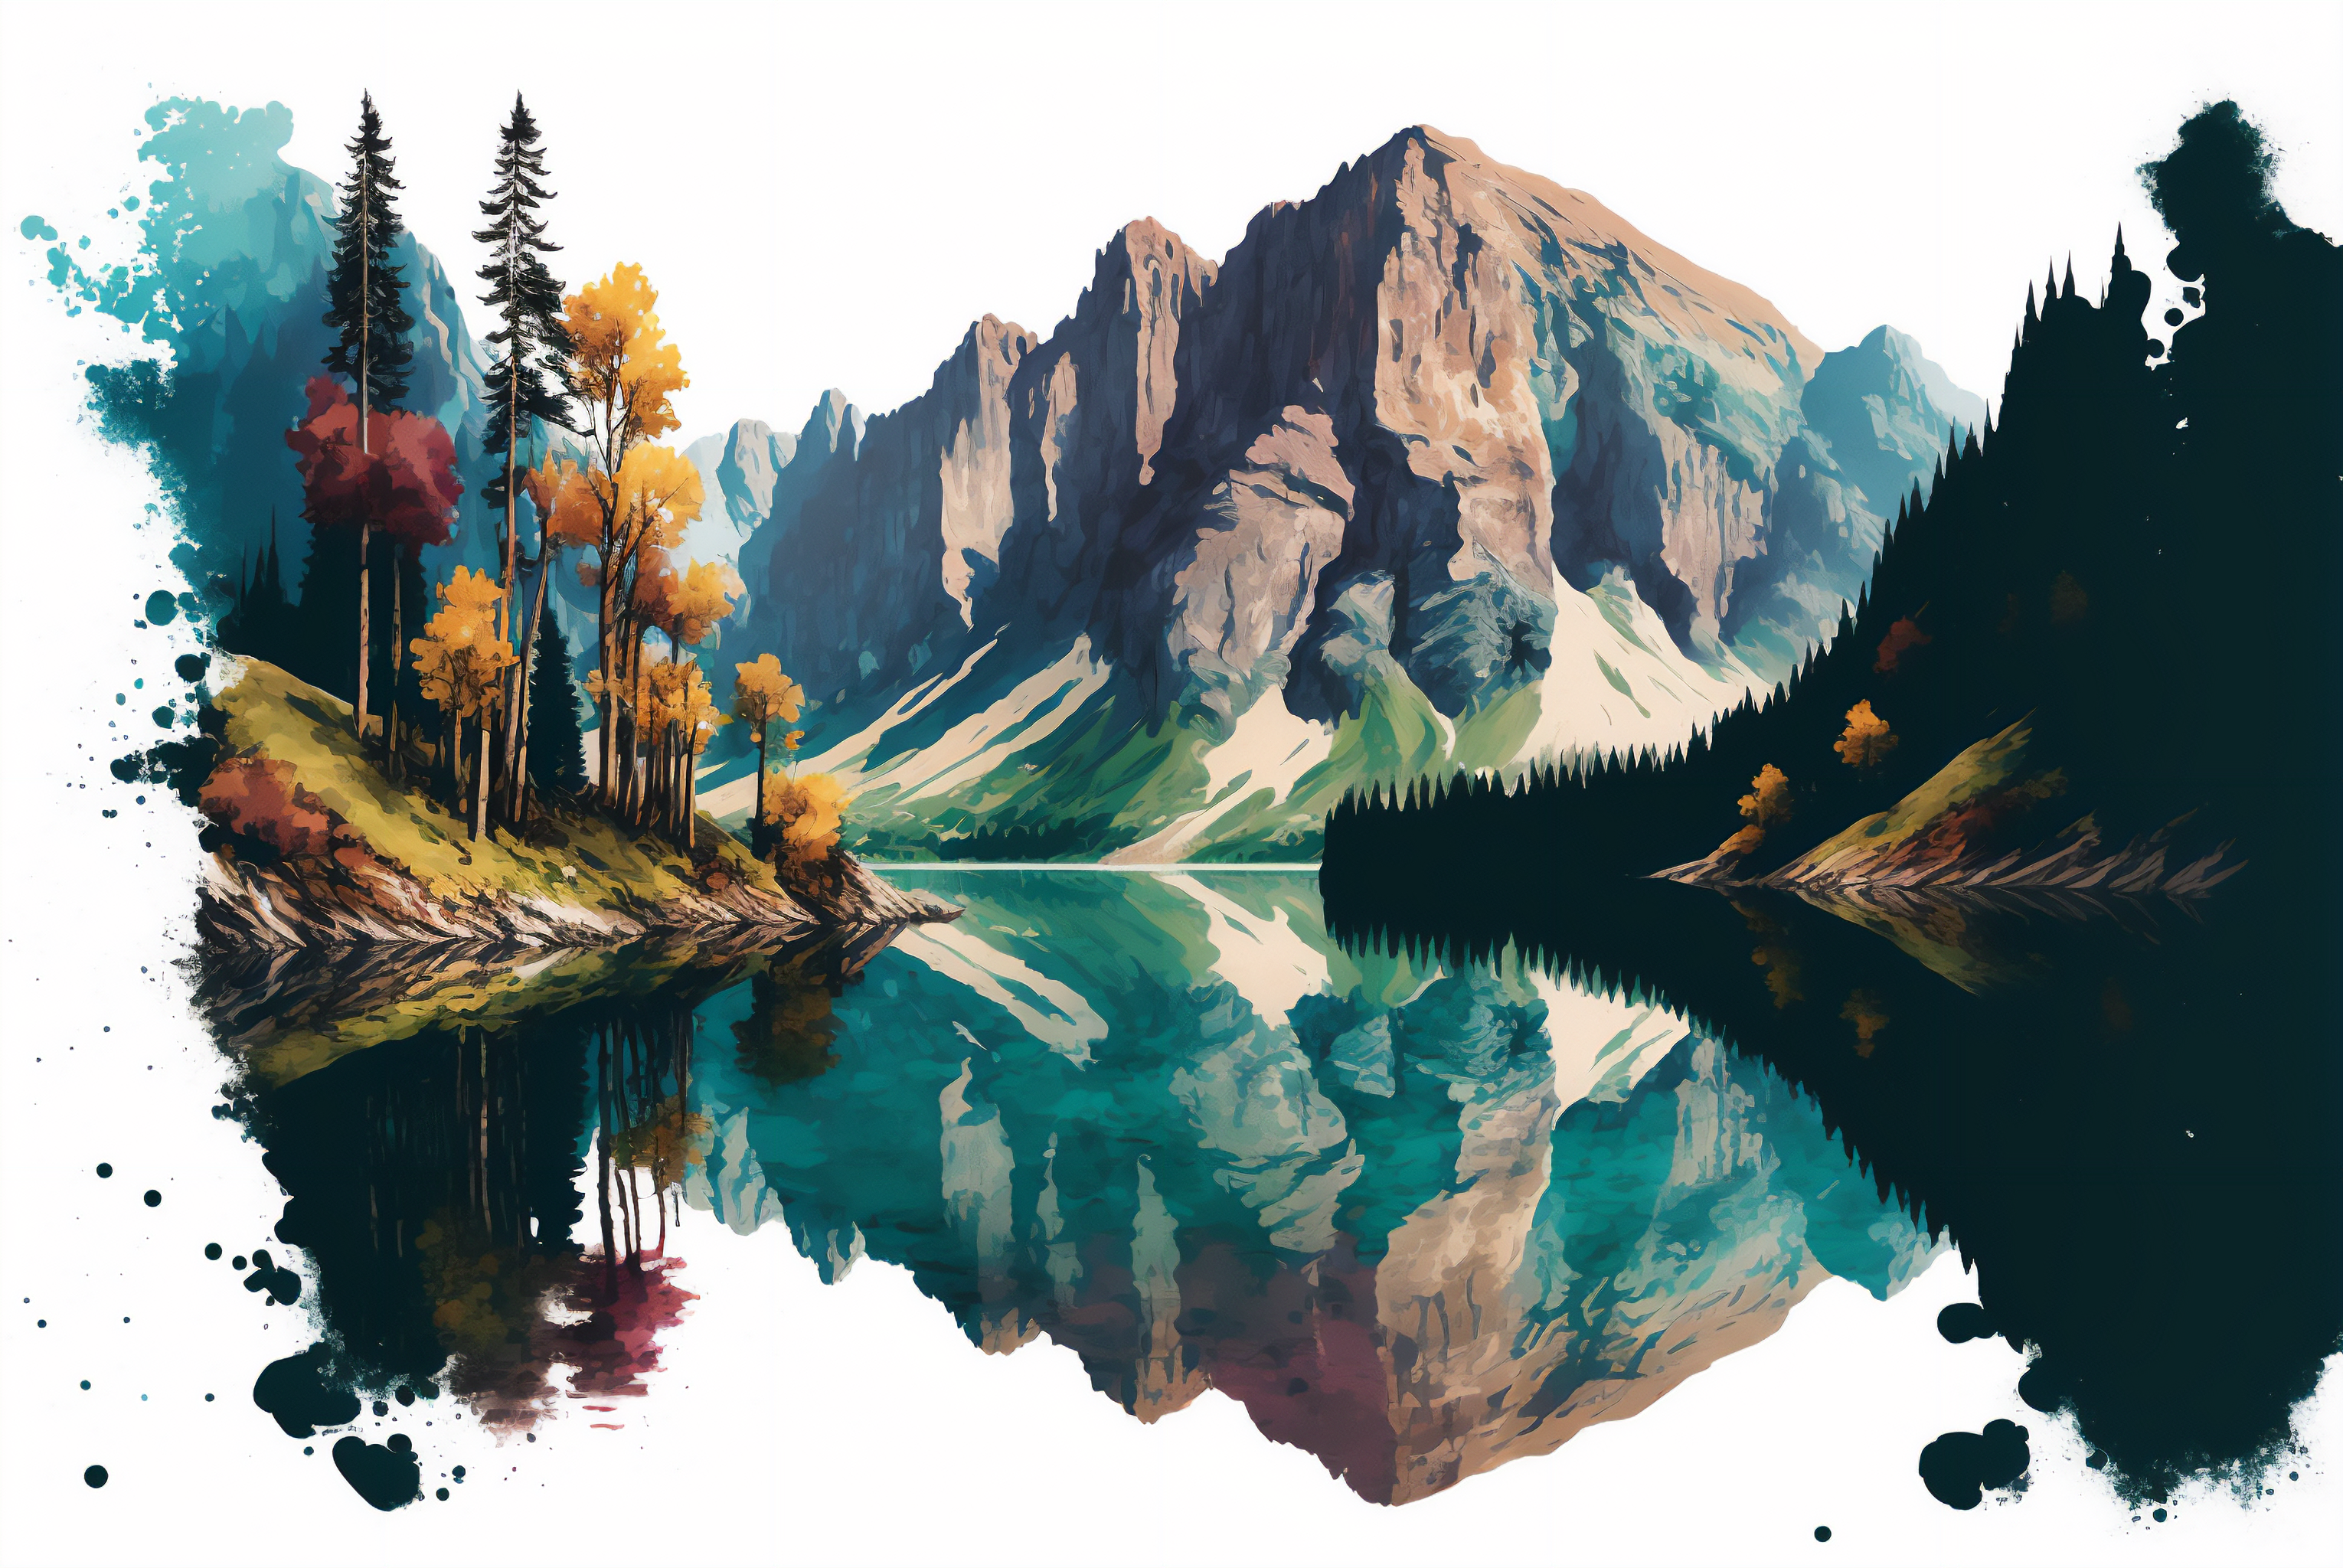 General 3060x2048 AI art watercolor style mountains lake landscape water reflection nature trees